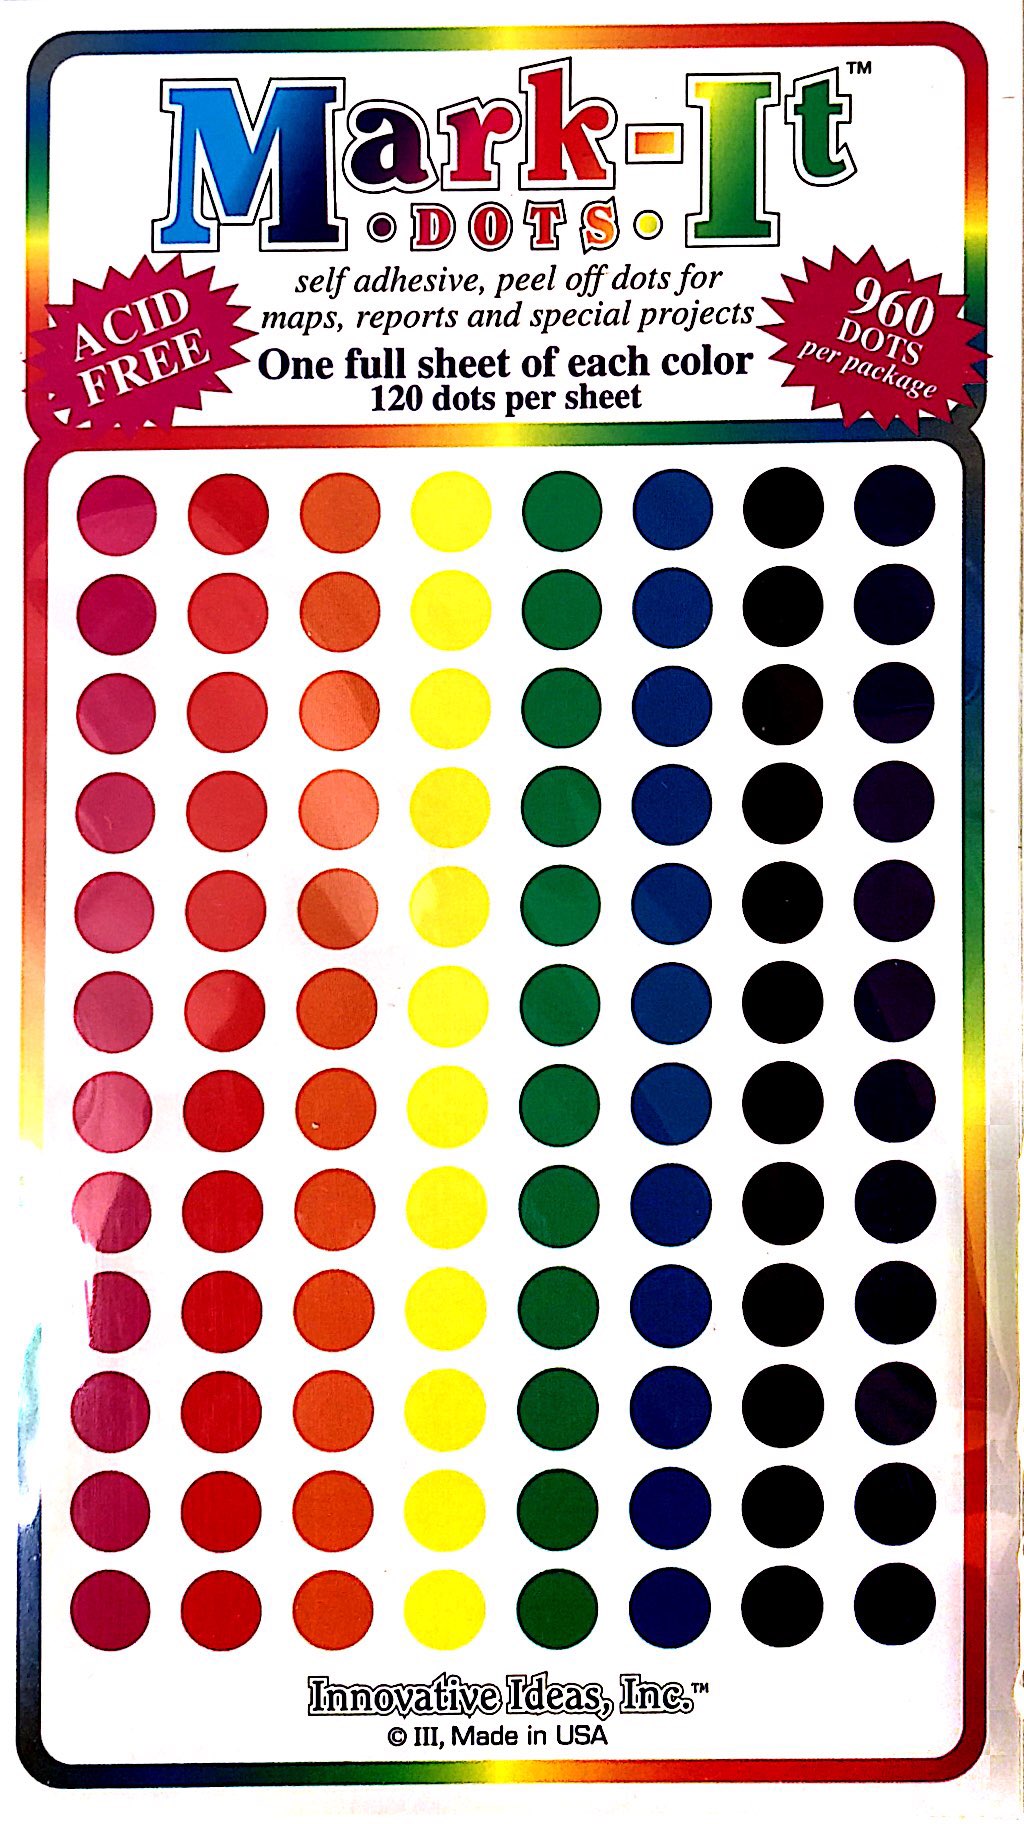 Map Dot Stickers - Assorted Colors - 1/4 Diameter